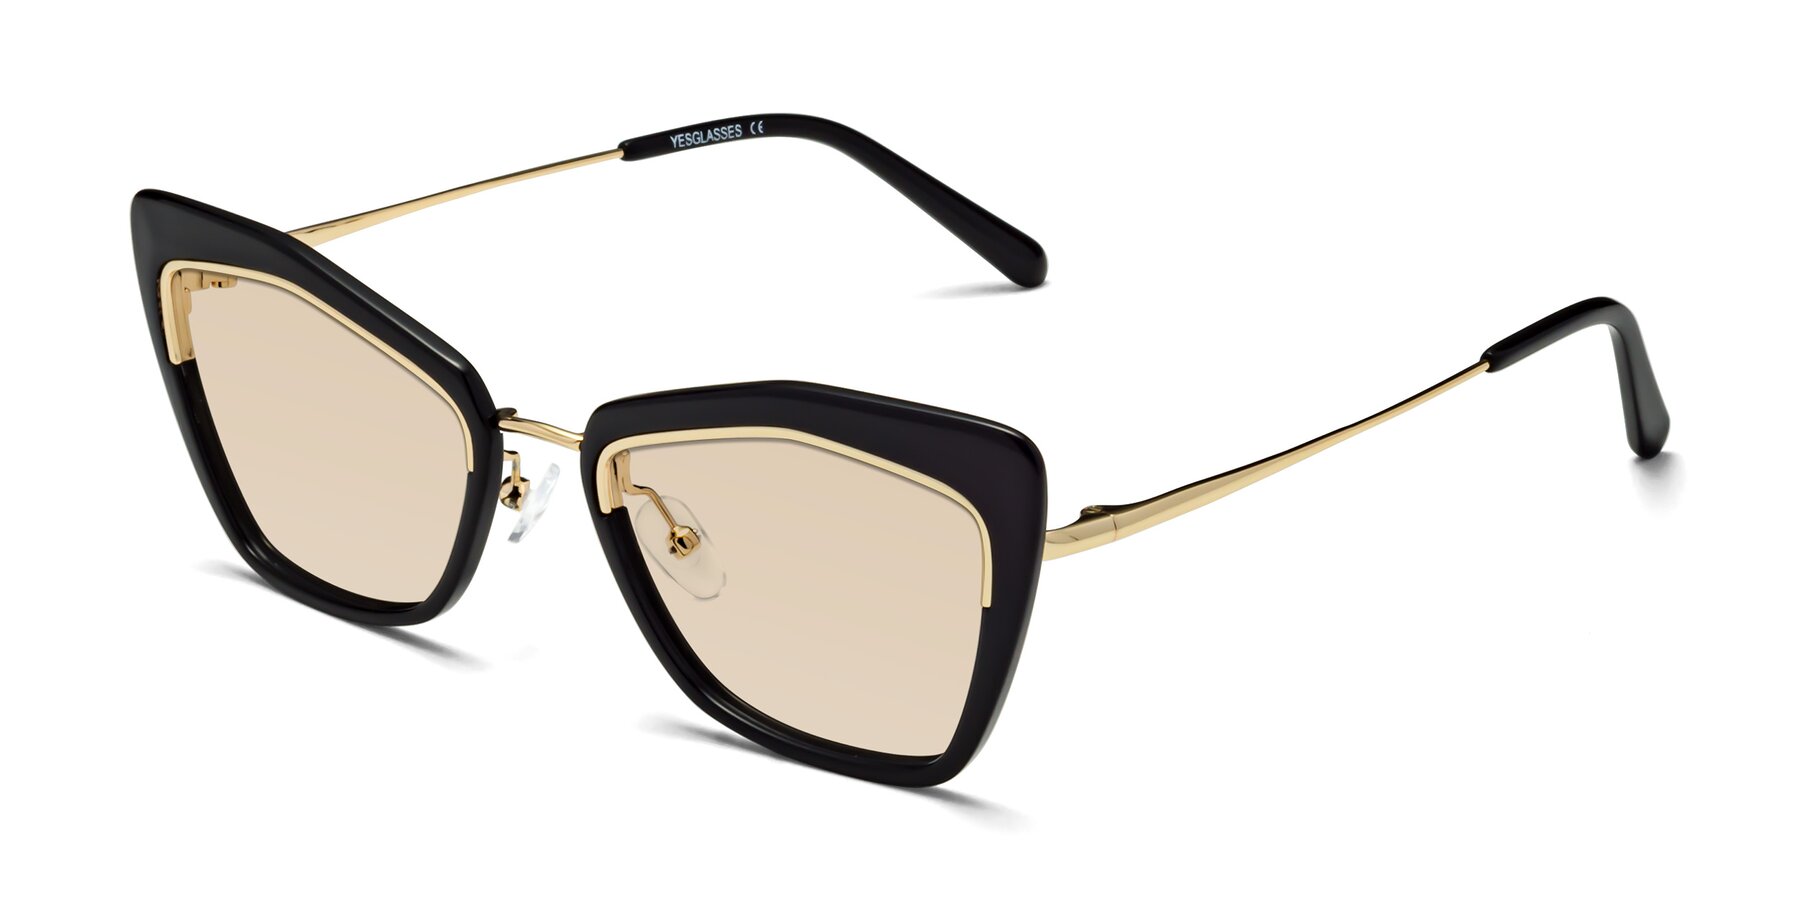 Angle of Lasso in Black with Light Brown Tinted Lenses